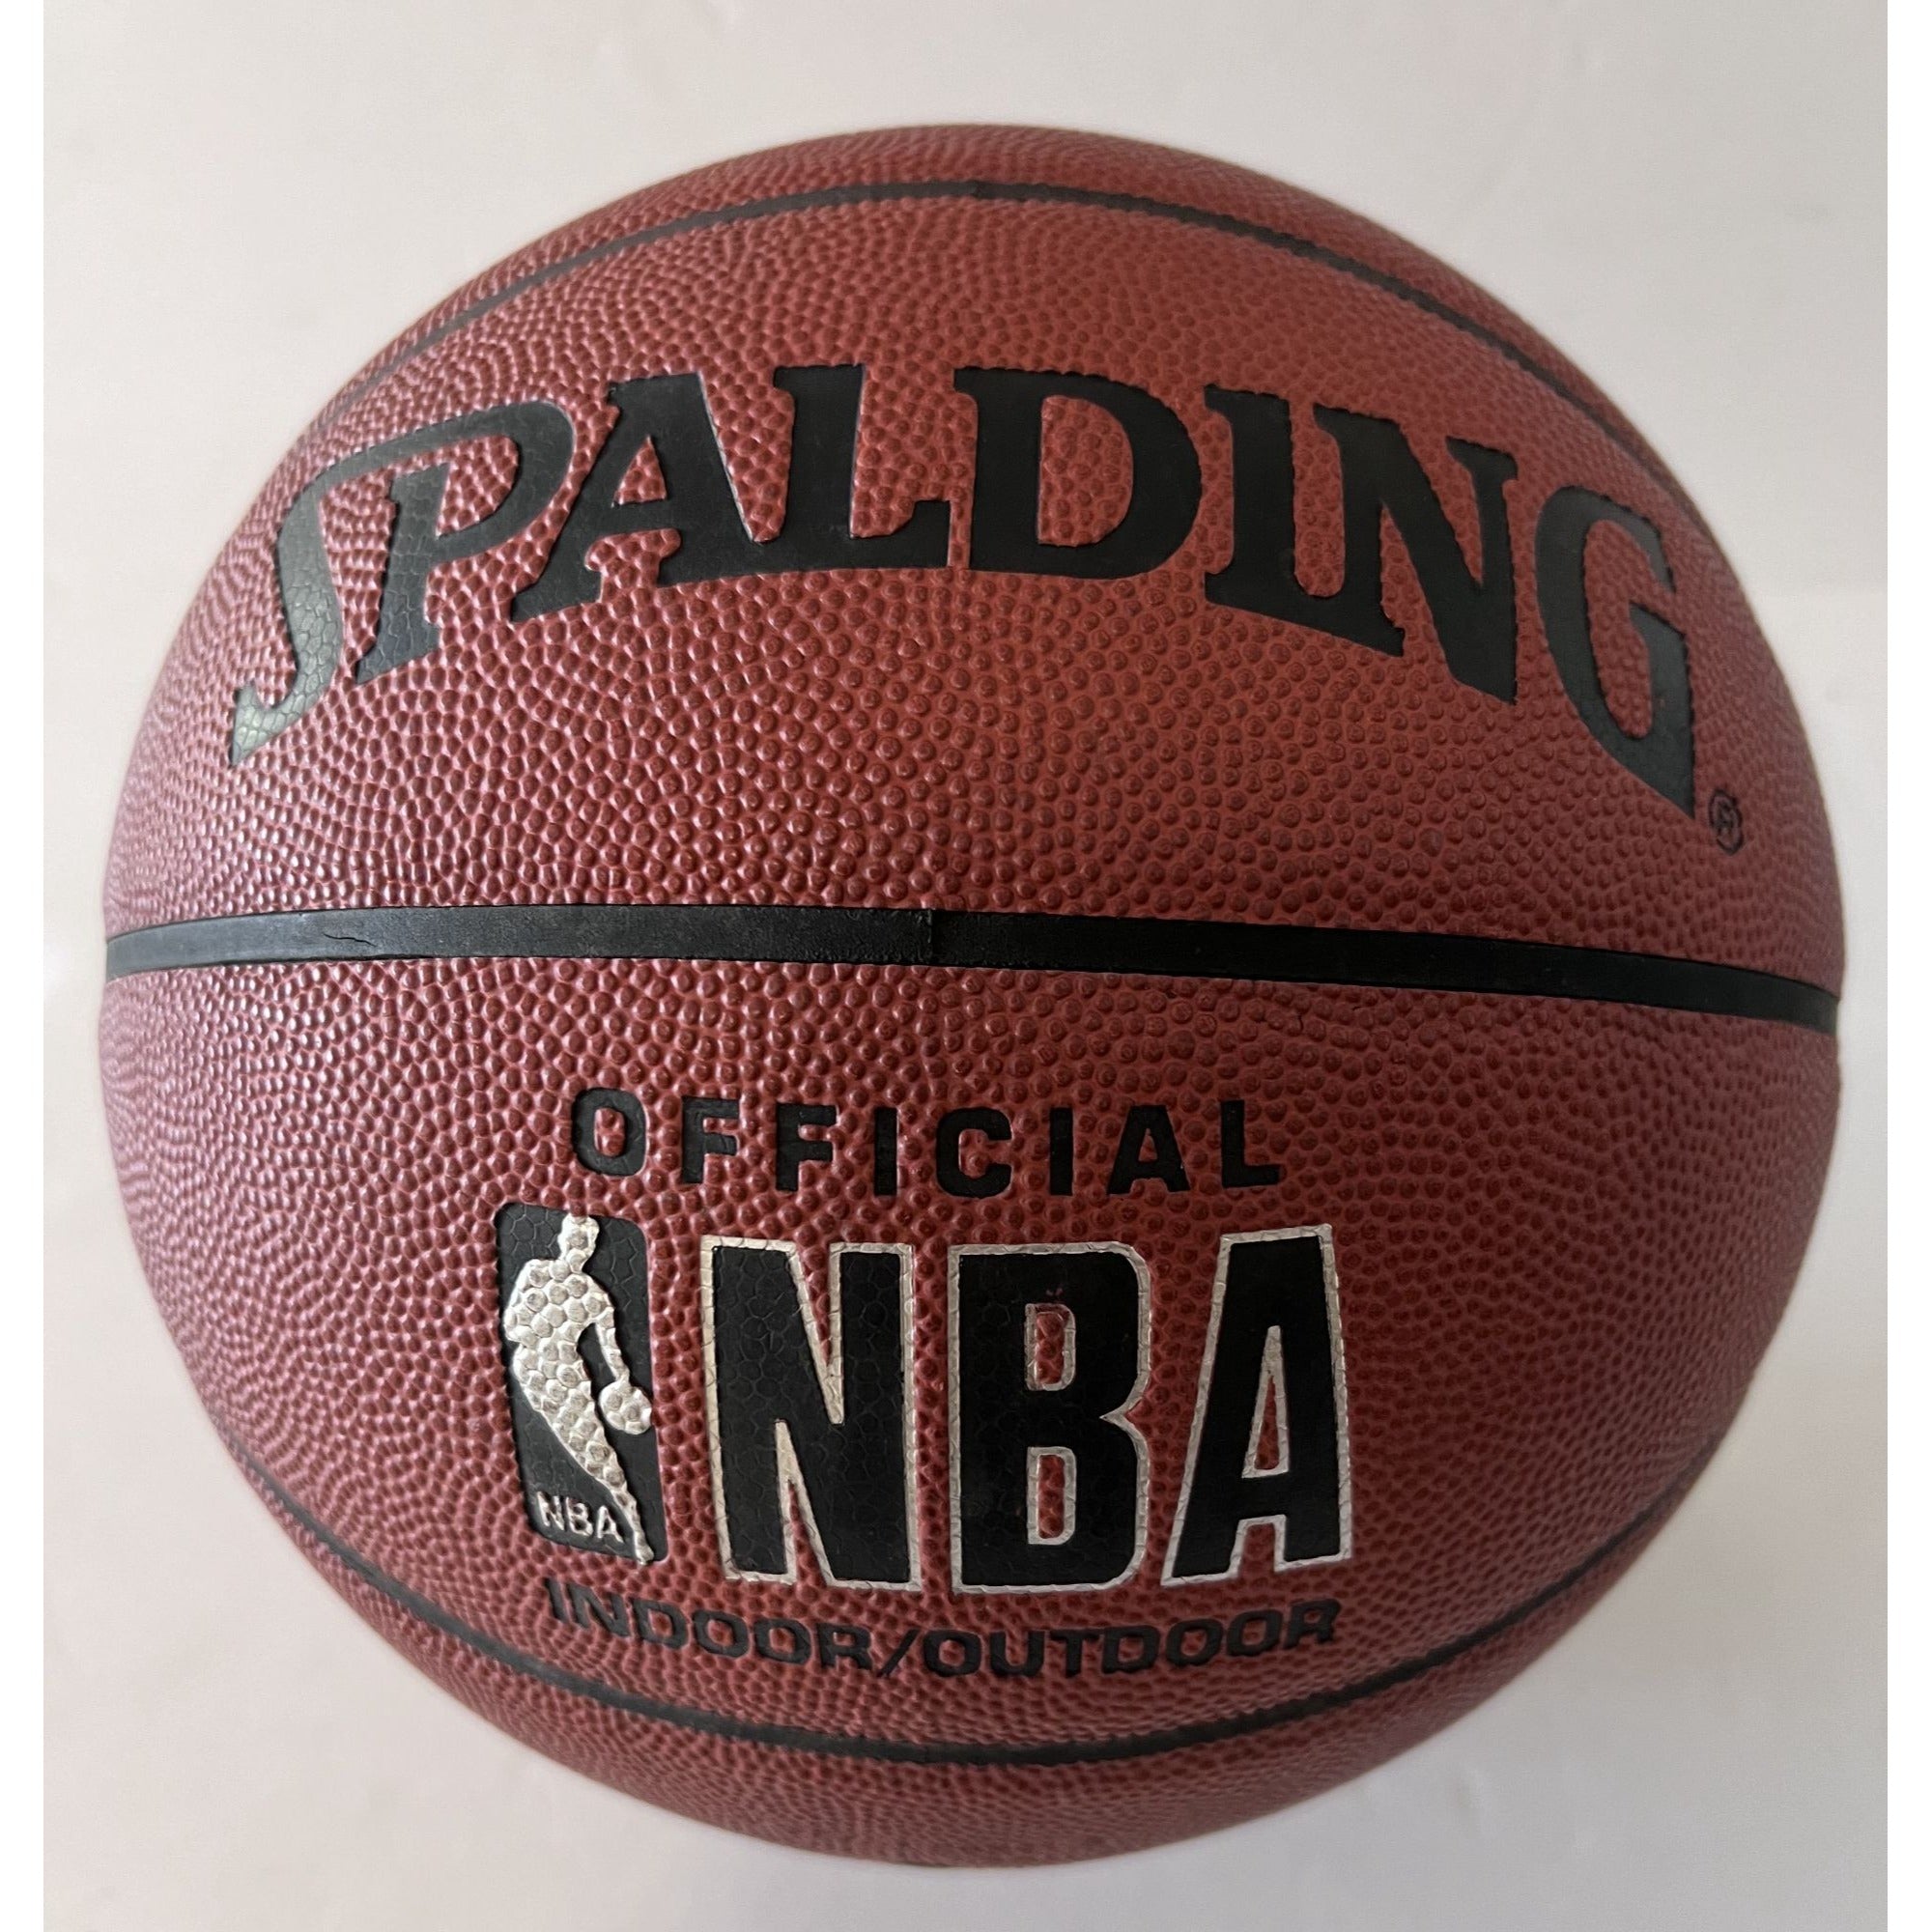 Kobe Bryant Los Angeles Lakers signed and inscribed "5 x champ" Spalding NBA basketball signed with proof